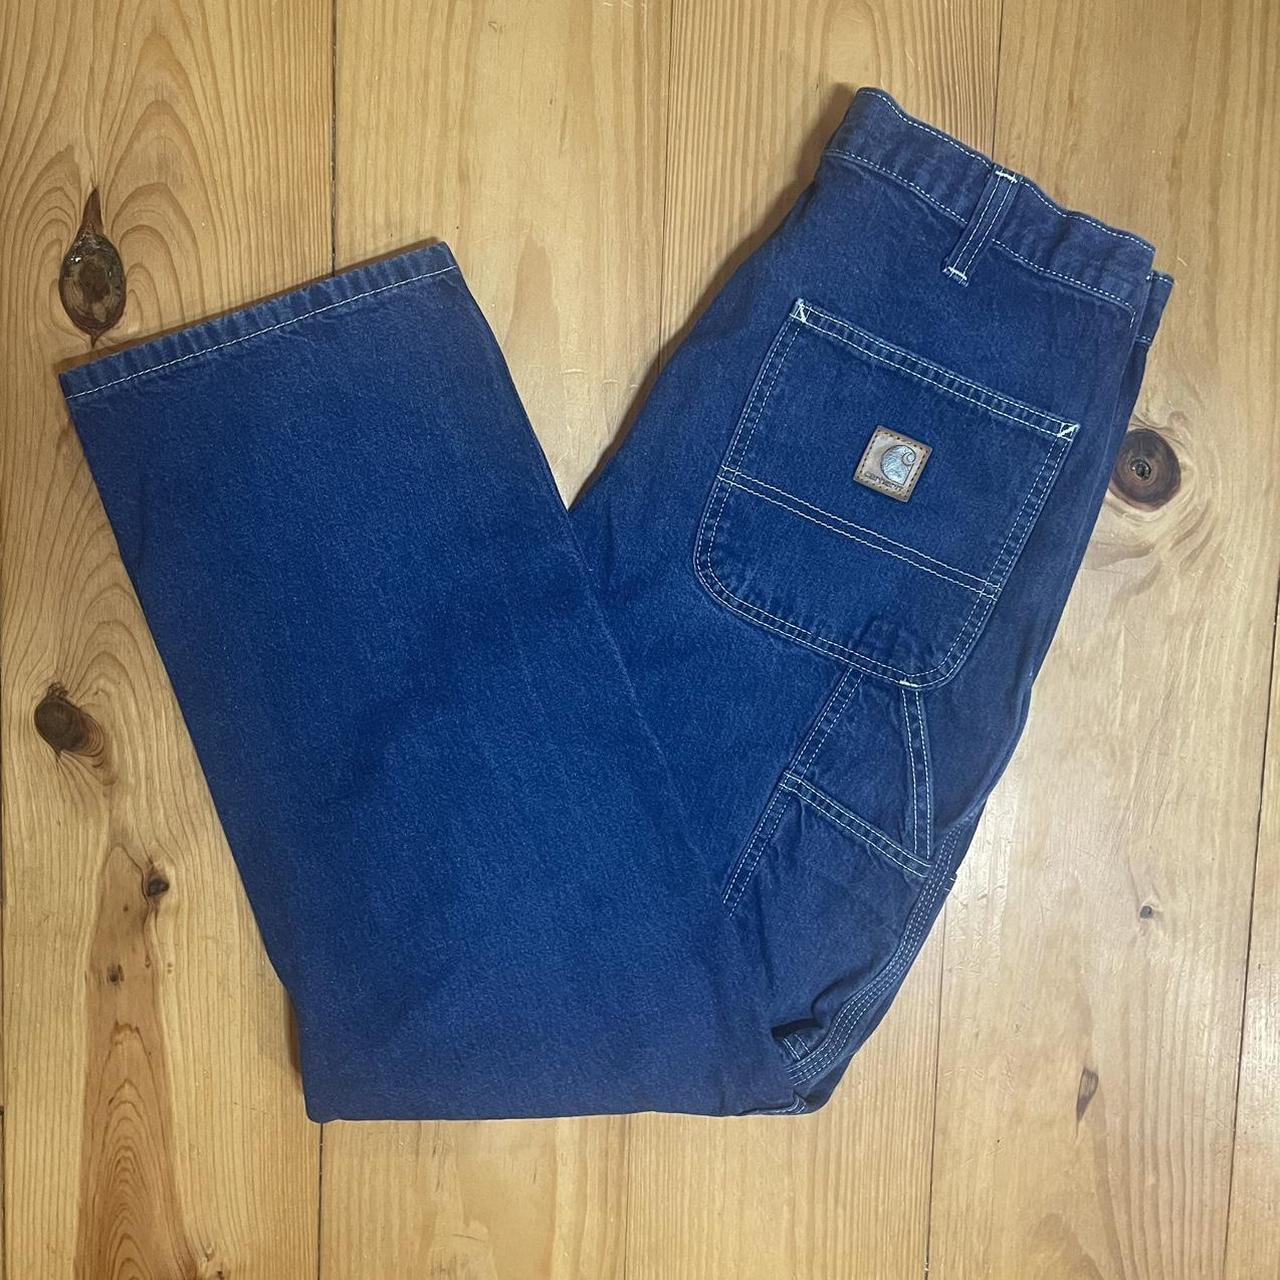 Vintage carhartt jeans white stitching leather tab... - Depop